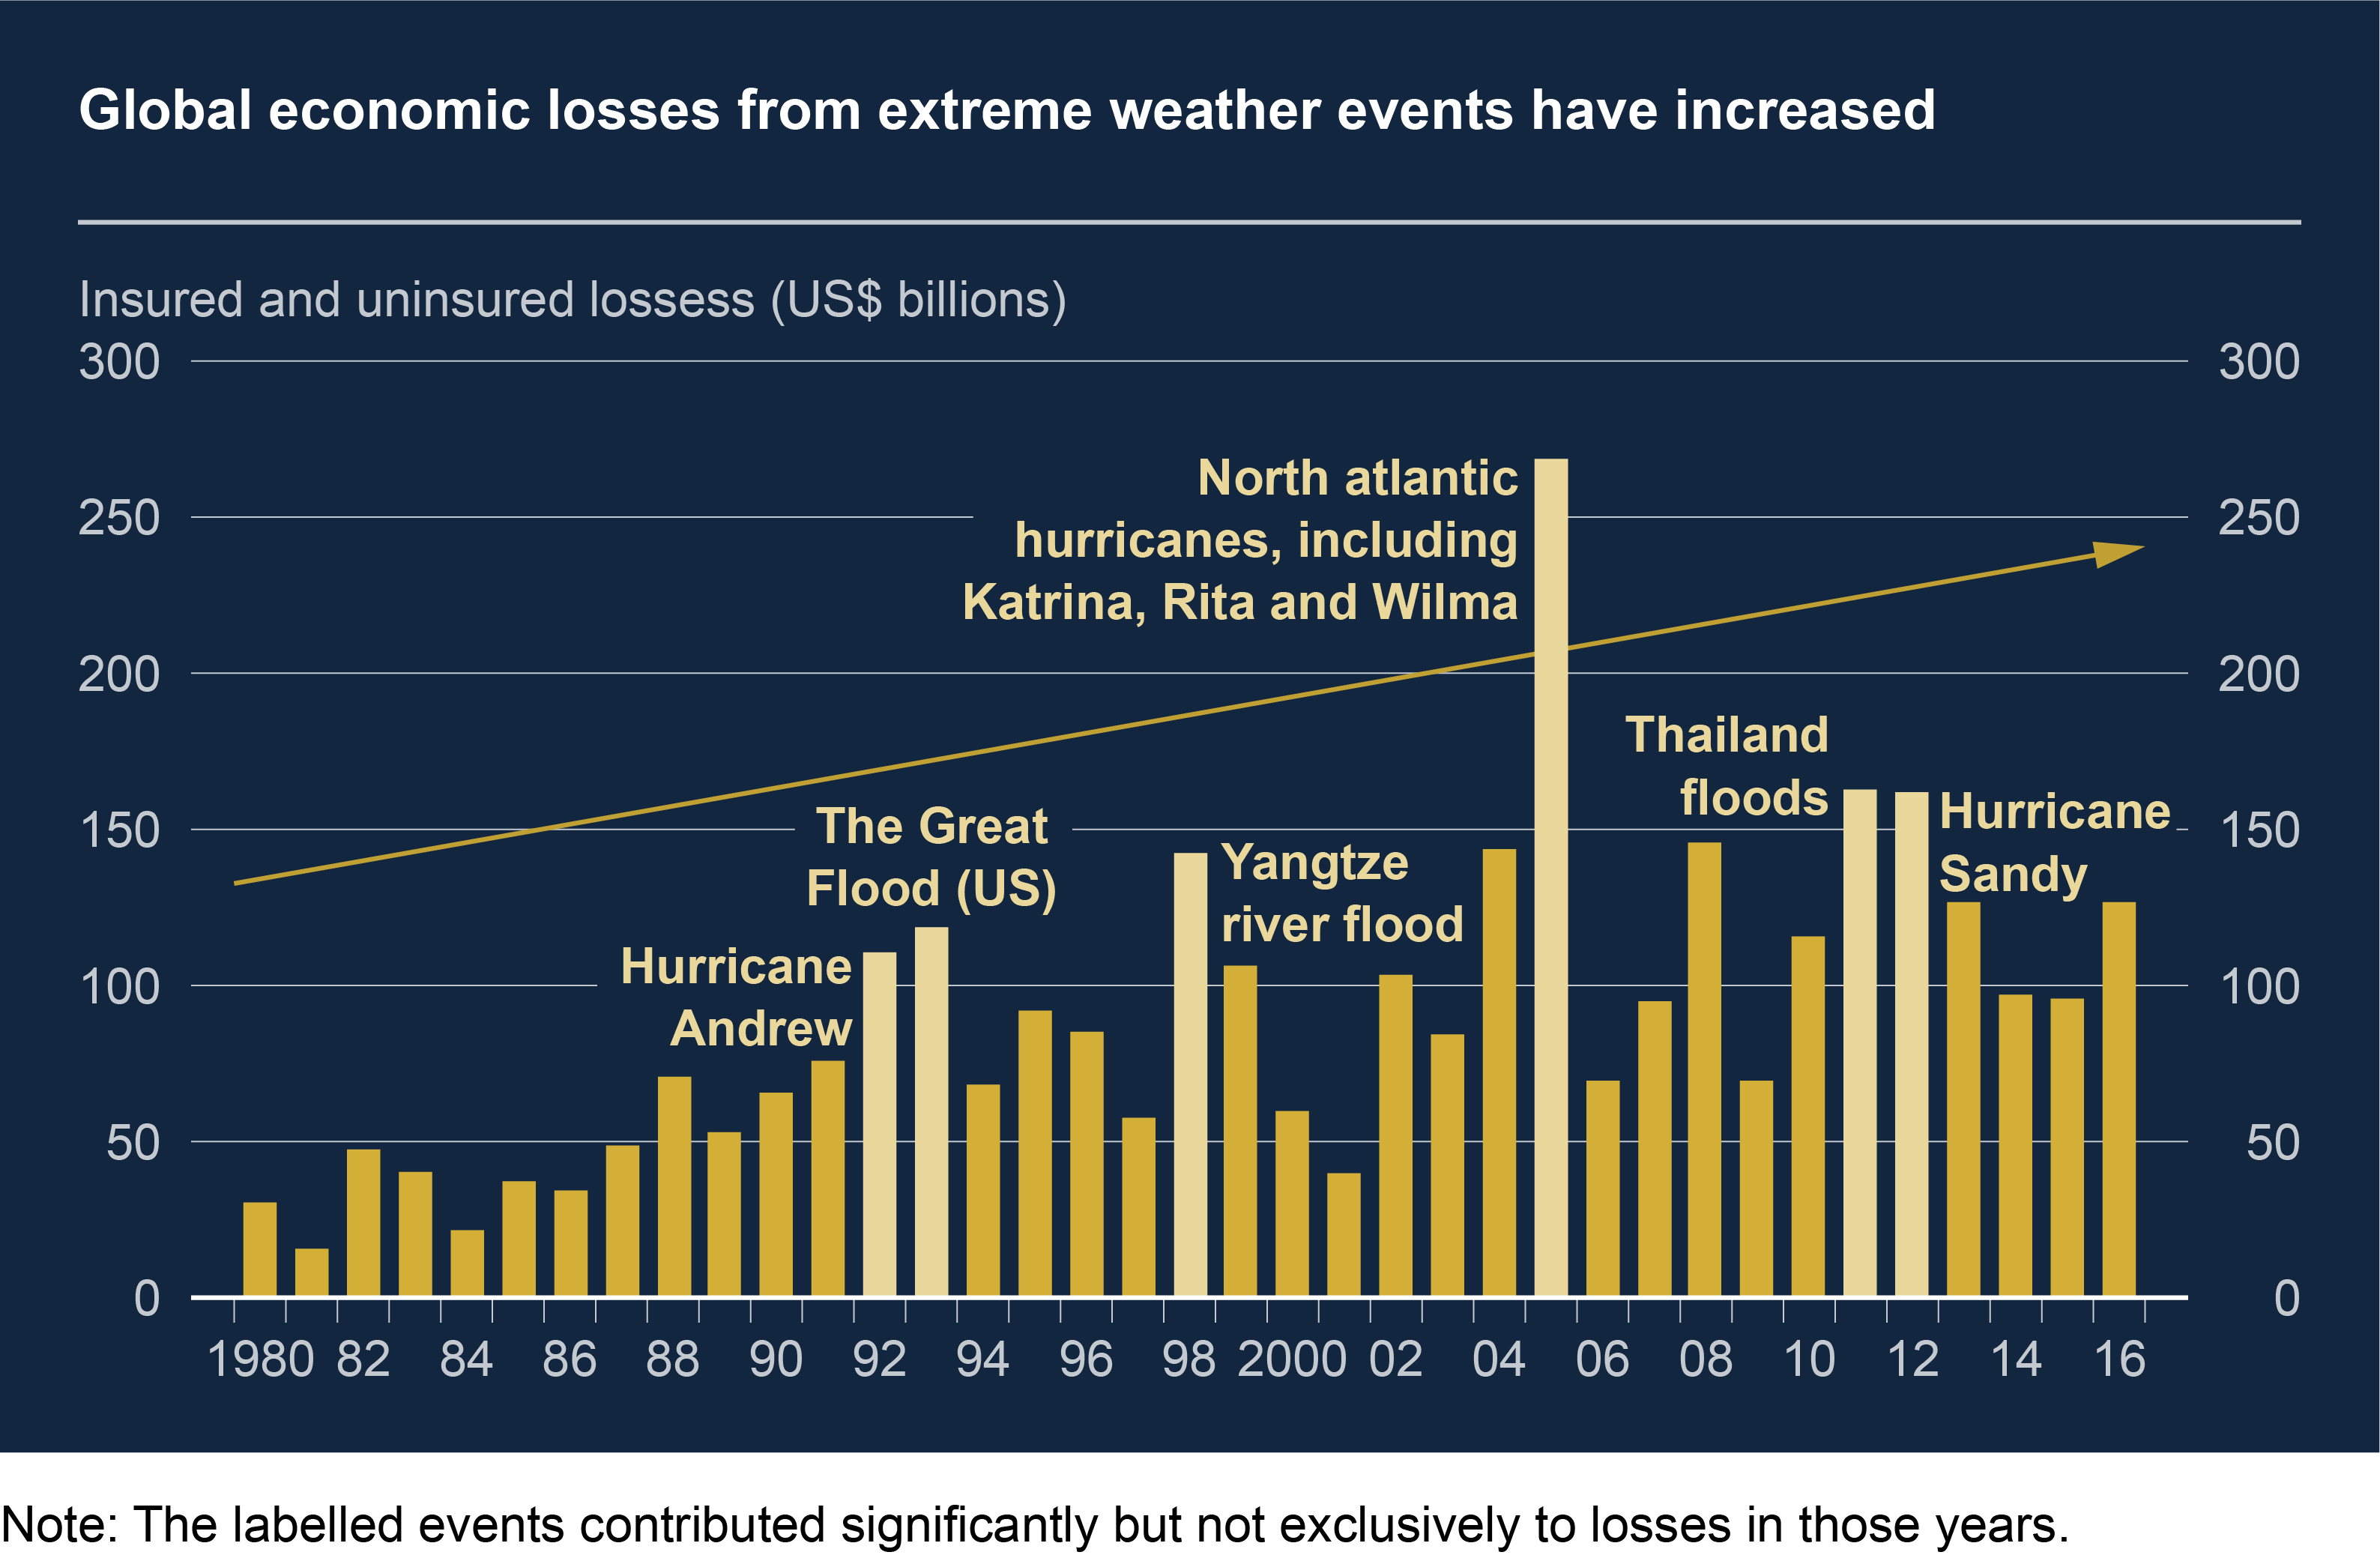 Global insured and uninsured economic losses from extreme weather have, on average, been gradually increasing since 1980.